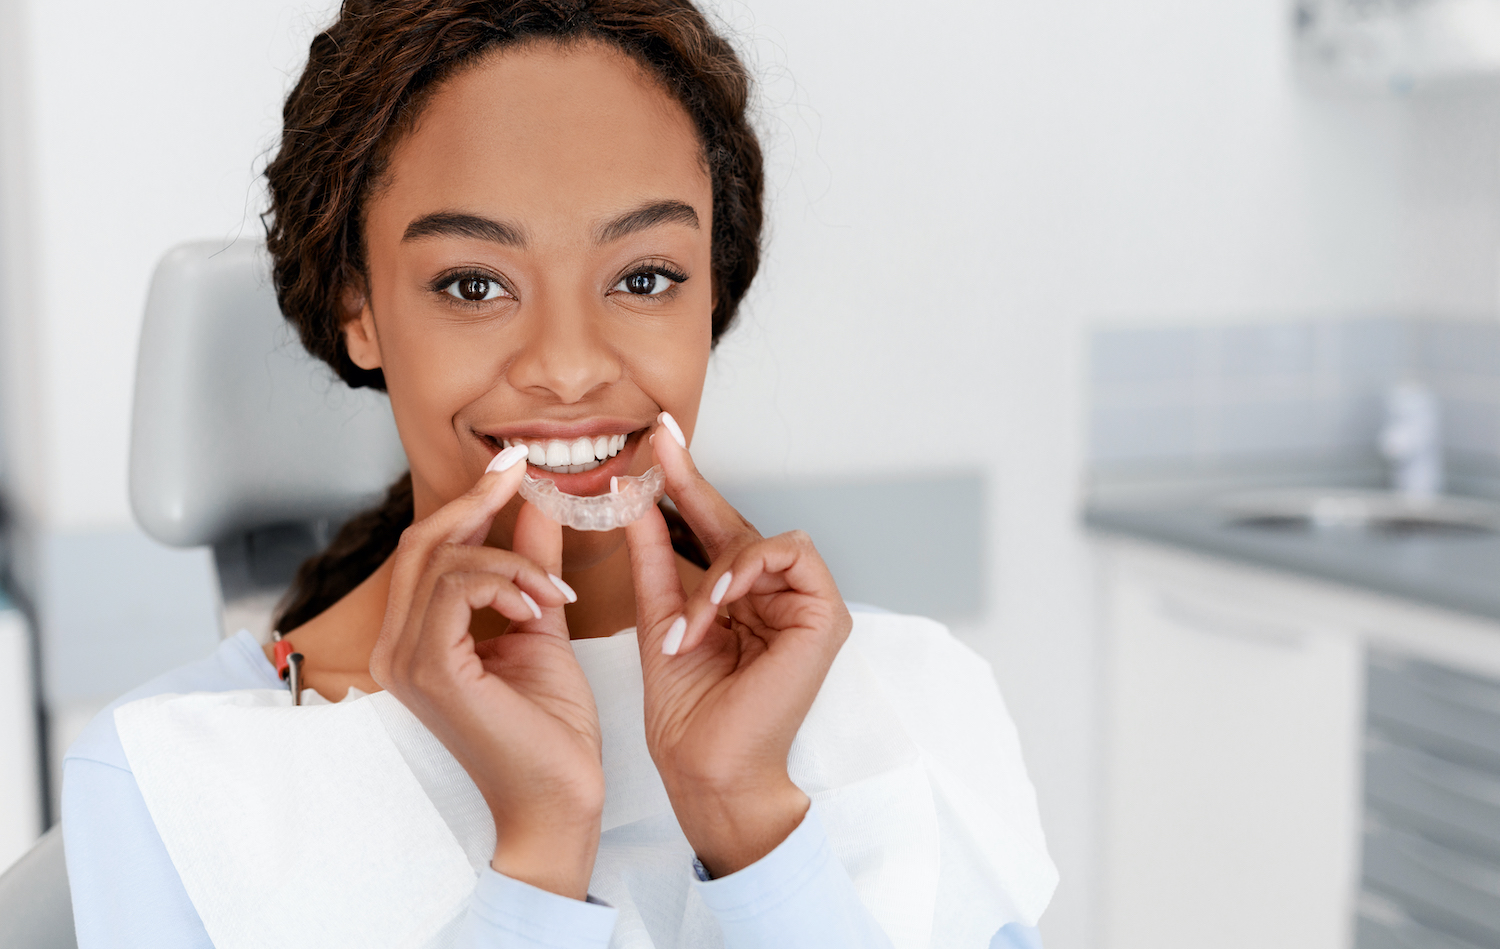 Black woman smiles while putting in her Invisalign clear aligner